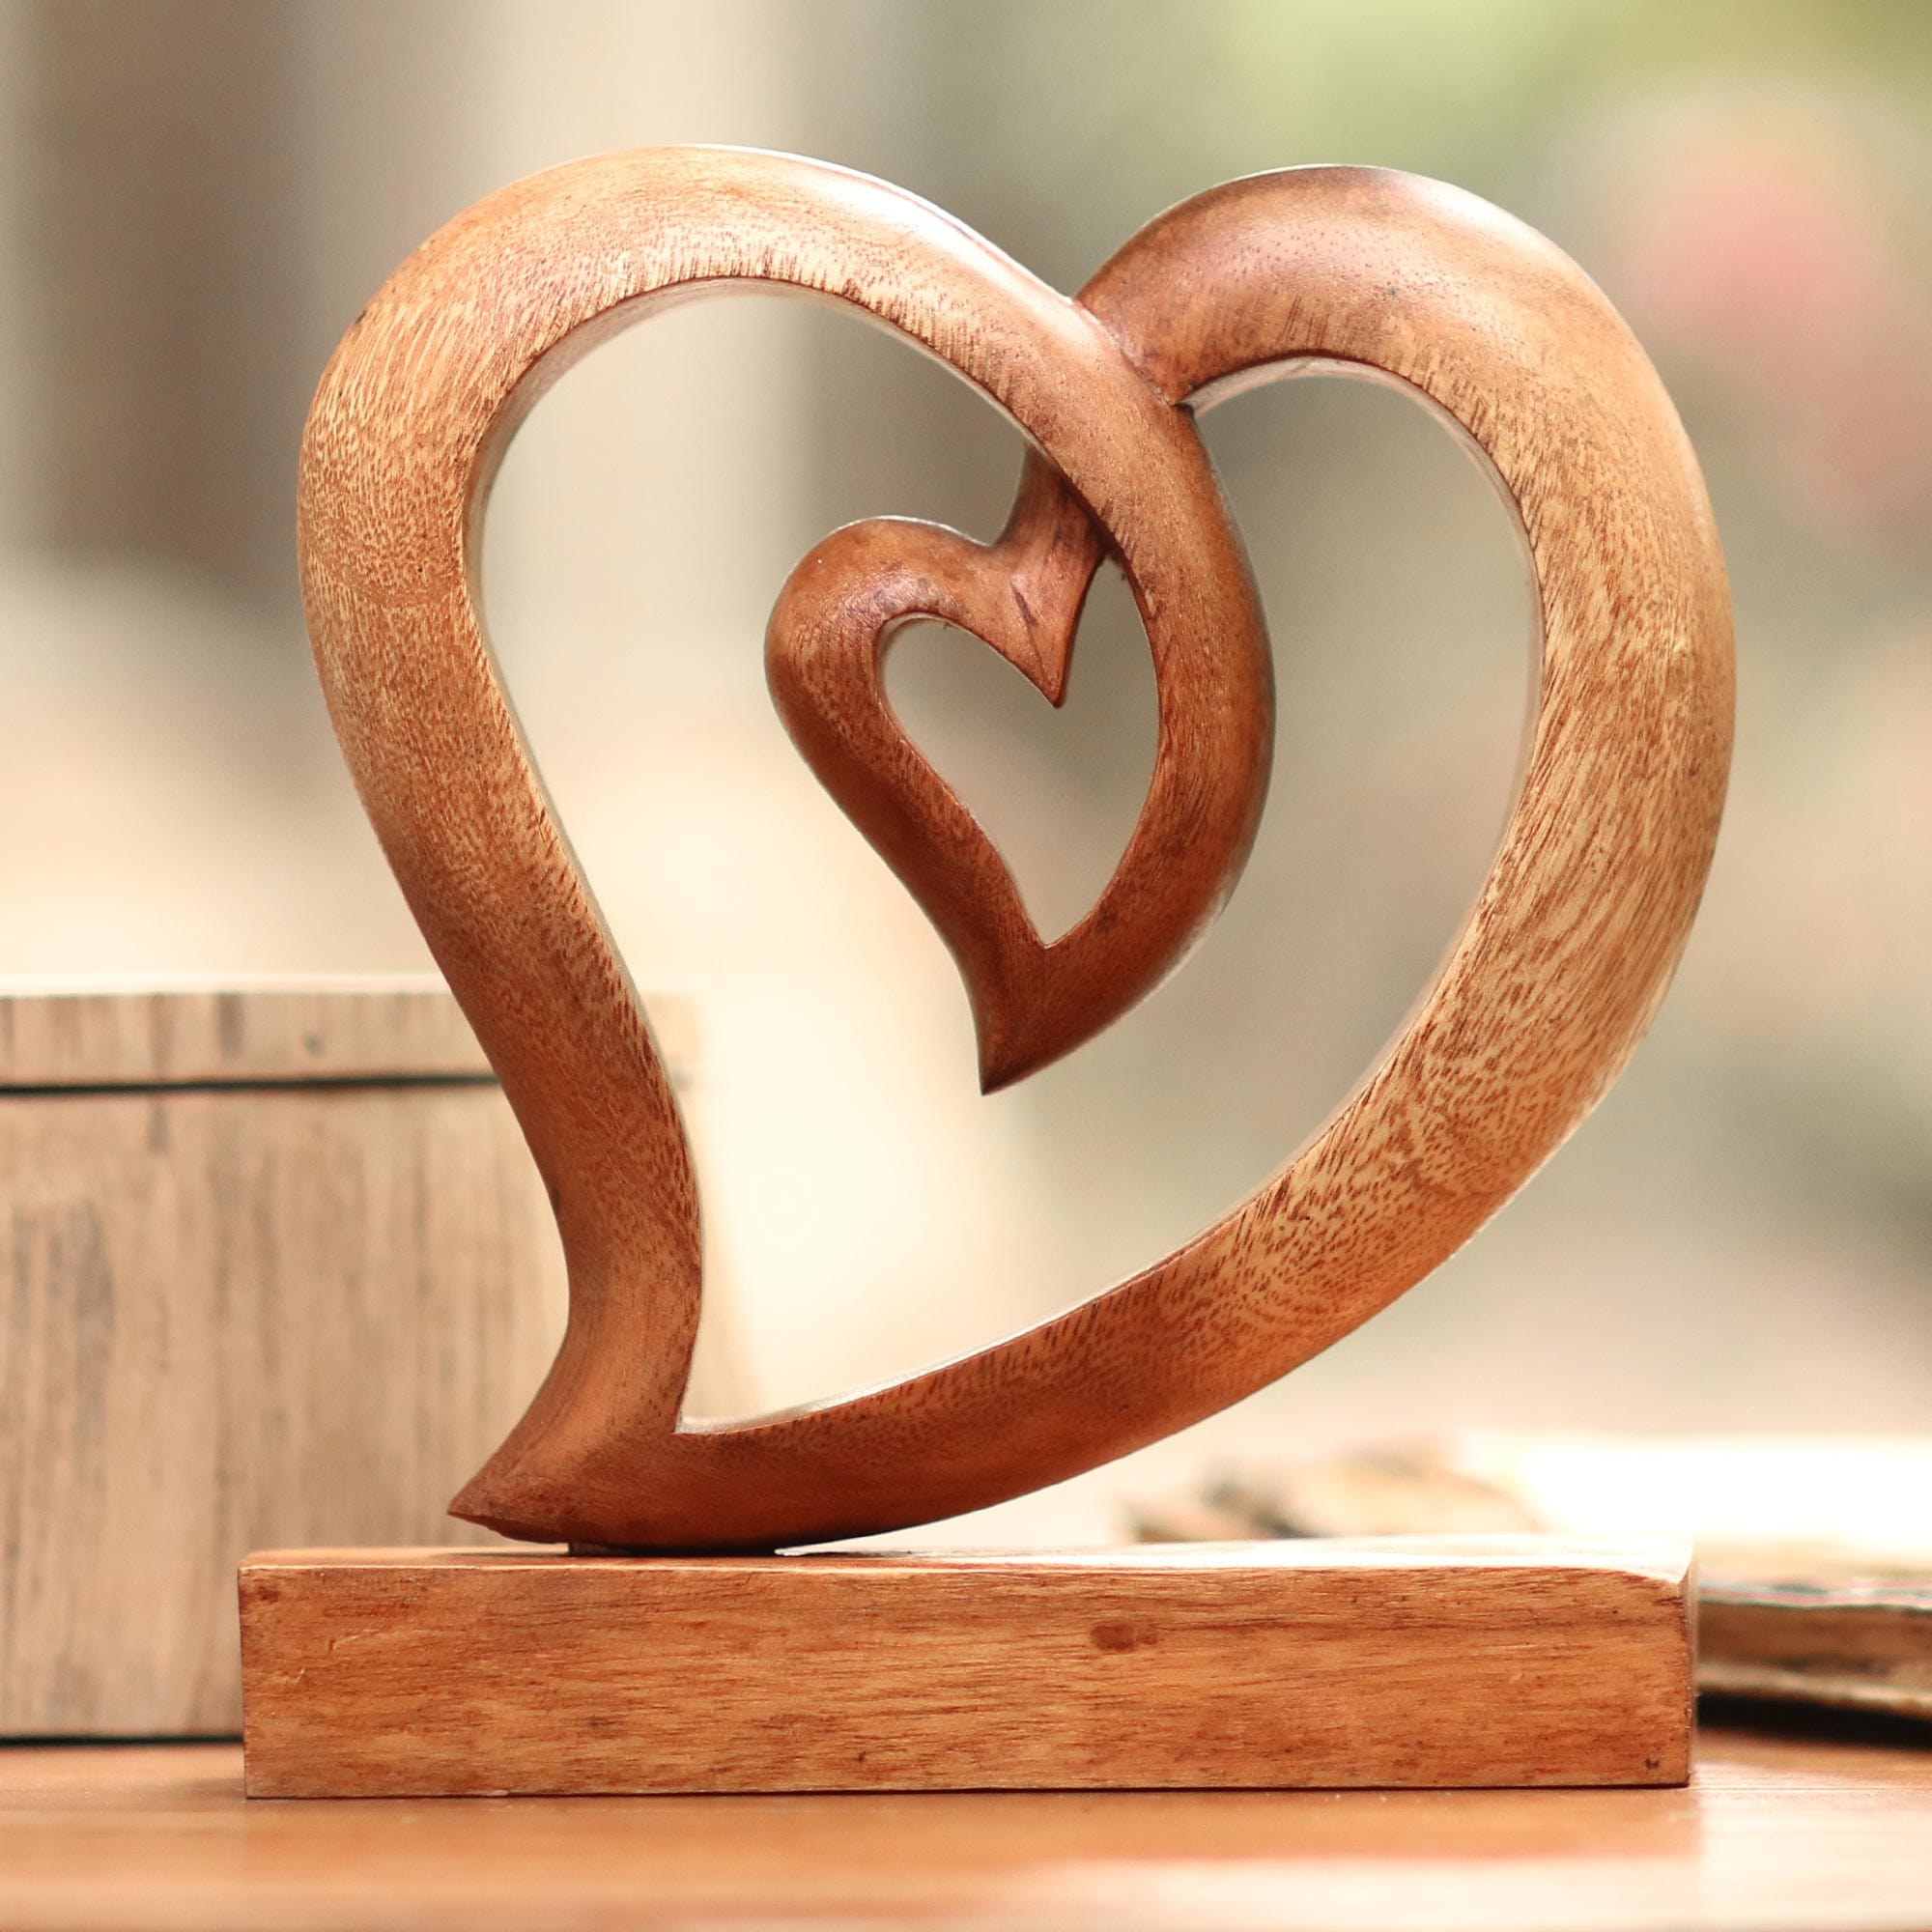 Hand Carved Suar Wood Heart Sculpture - Valentine Edition